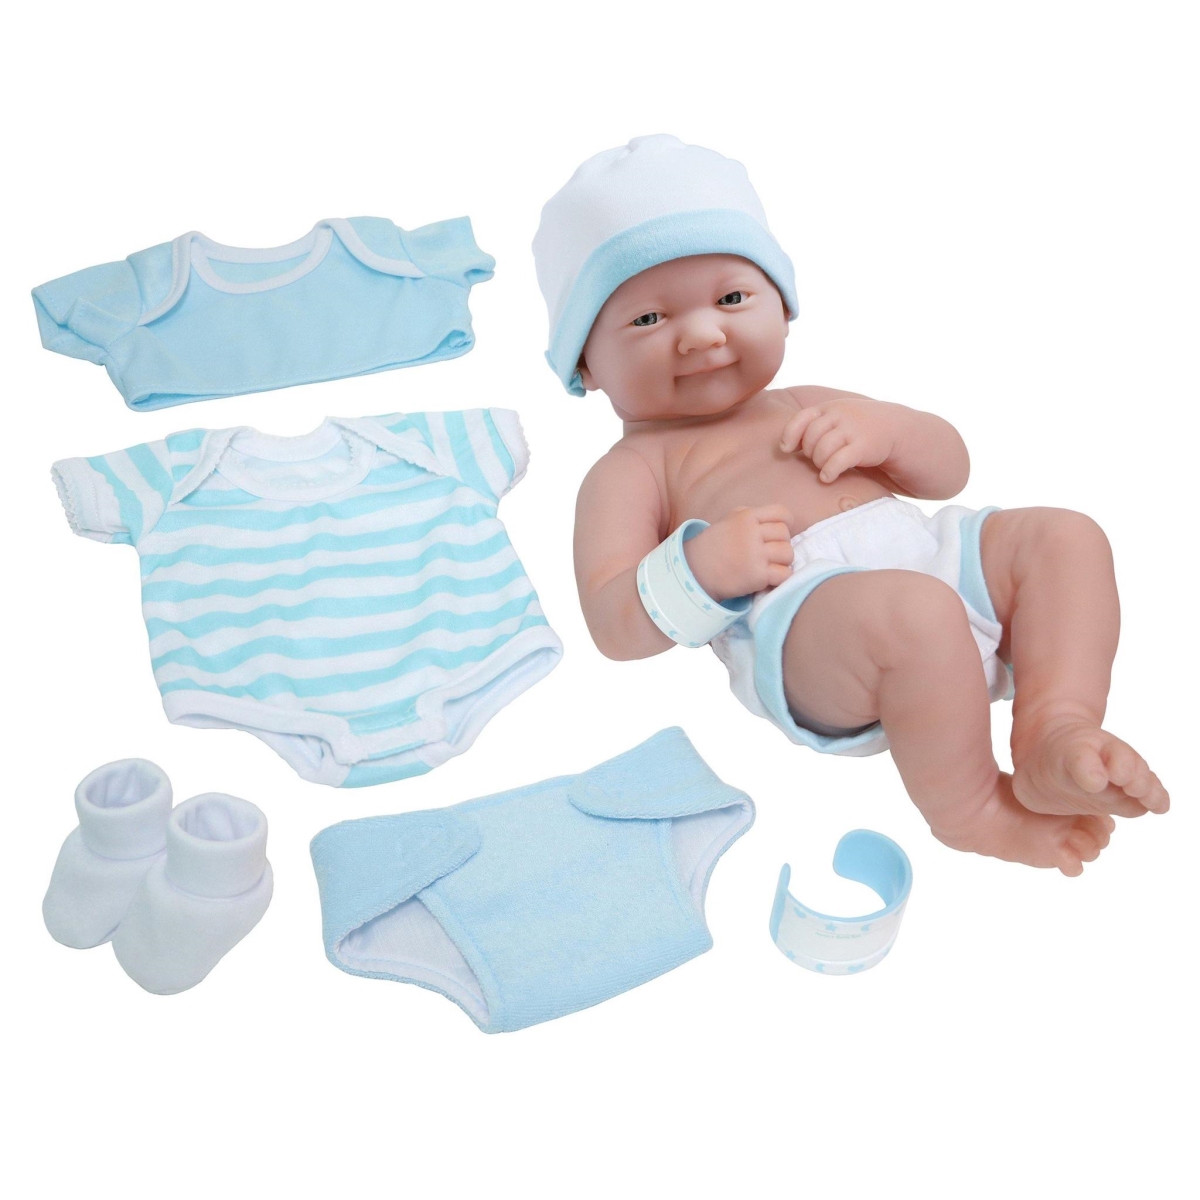 Picture of La Newborn Nursery 8 Piece Blue Layette Baby Doll Gift Set  14 in. Life-Like Smiling Doll